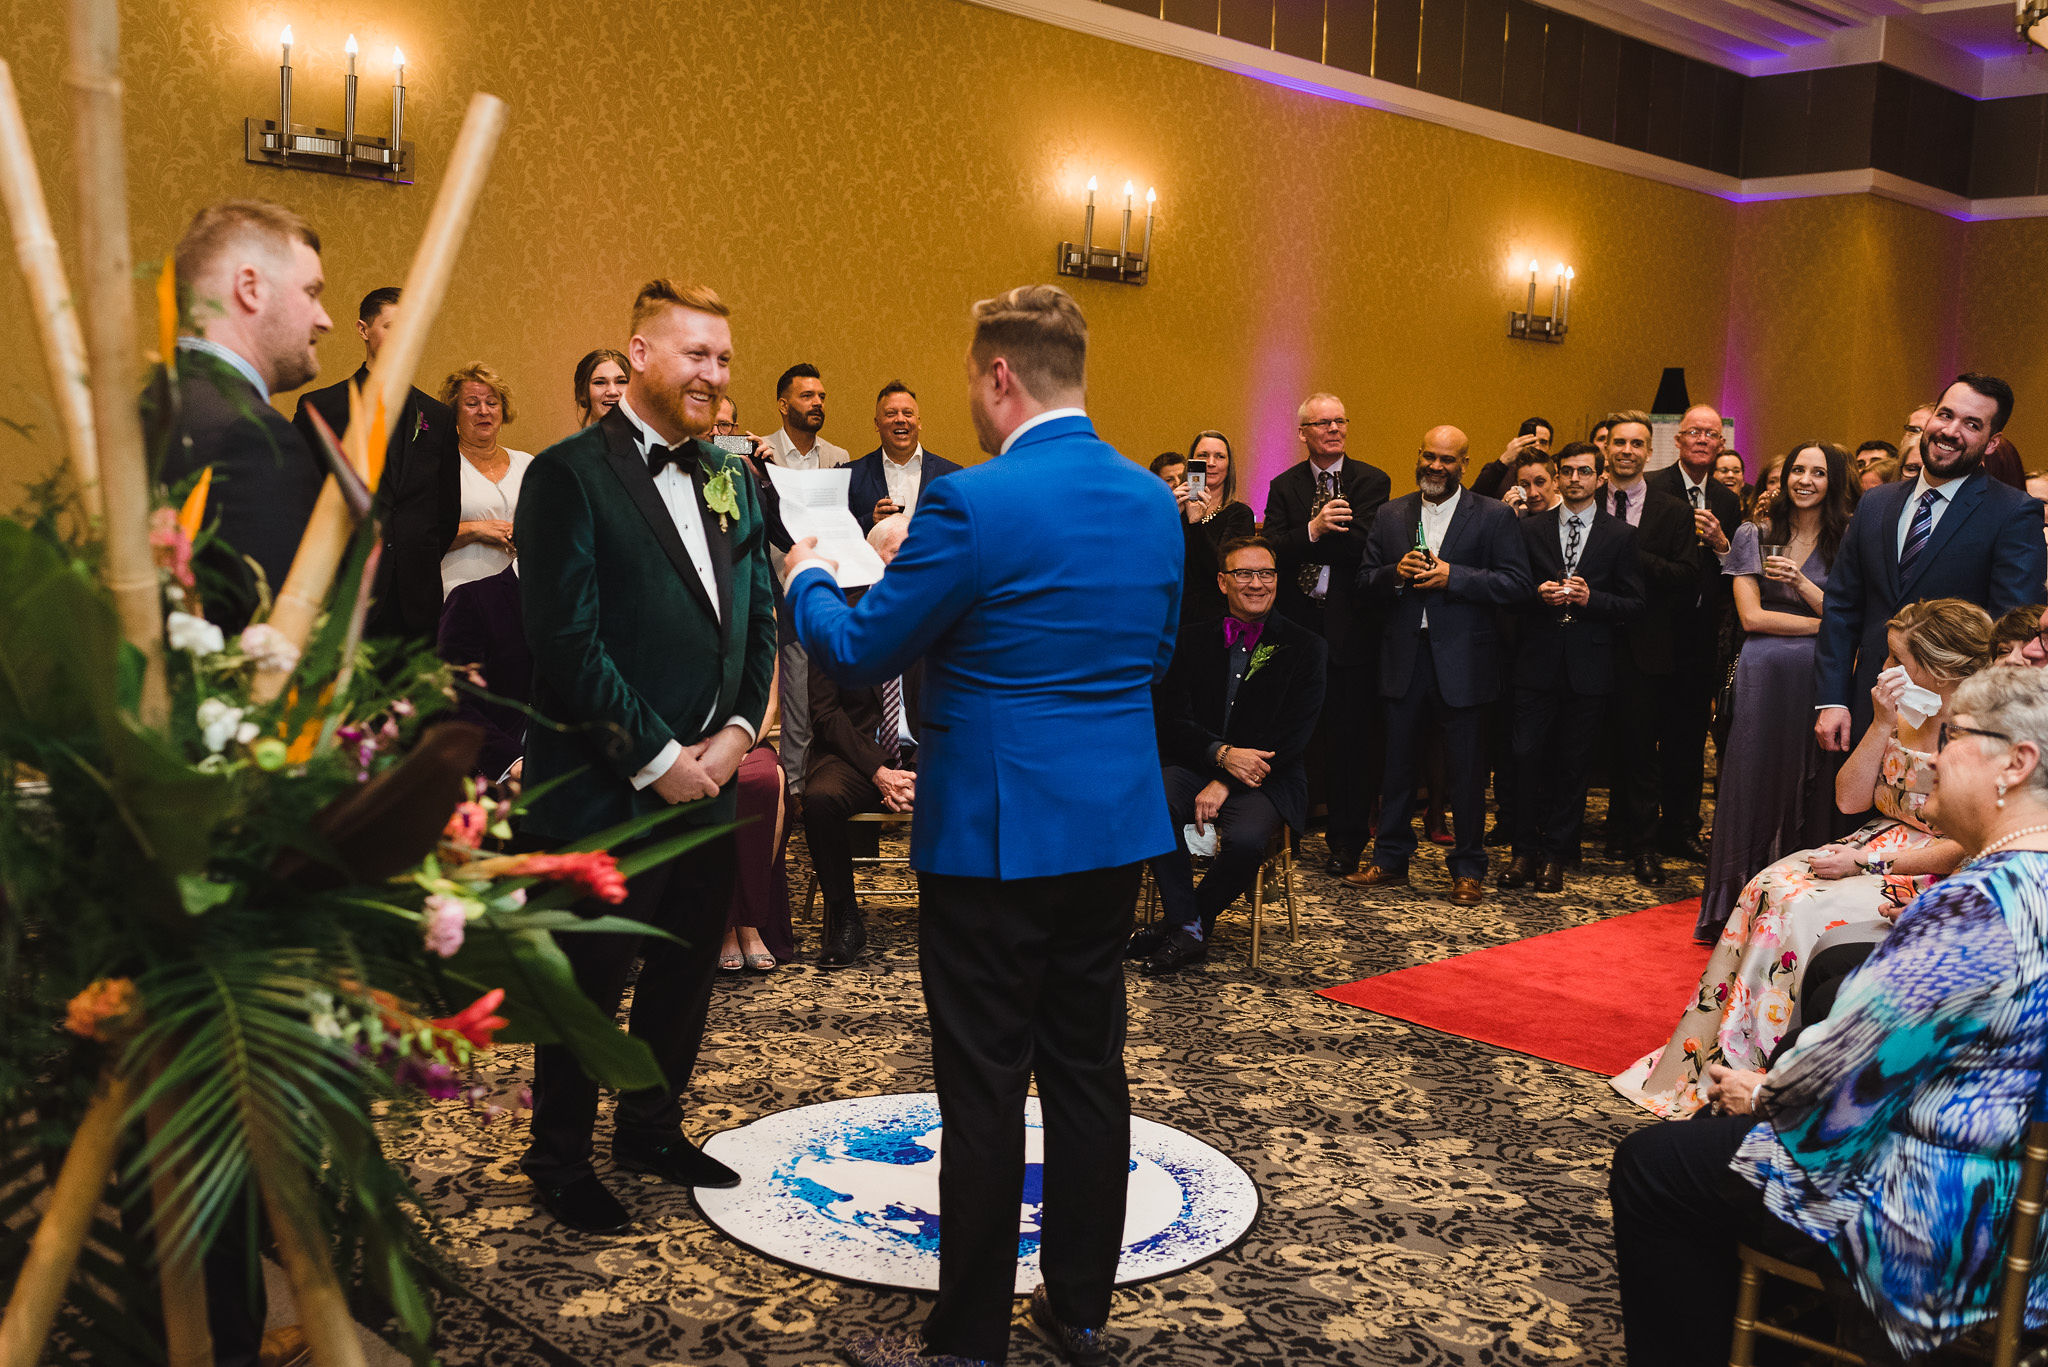 groom smiles and wedding guest look on as the other groom reads his vows aloud during wedding ceremony at the Hilton Fallsview in Niagara Falls